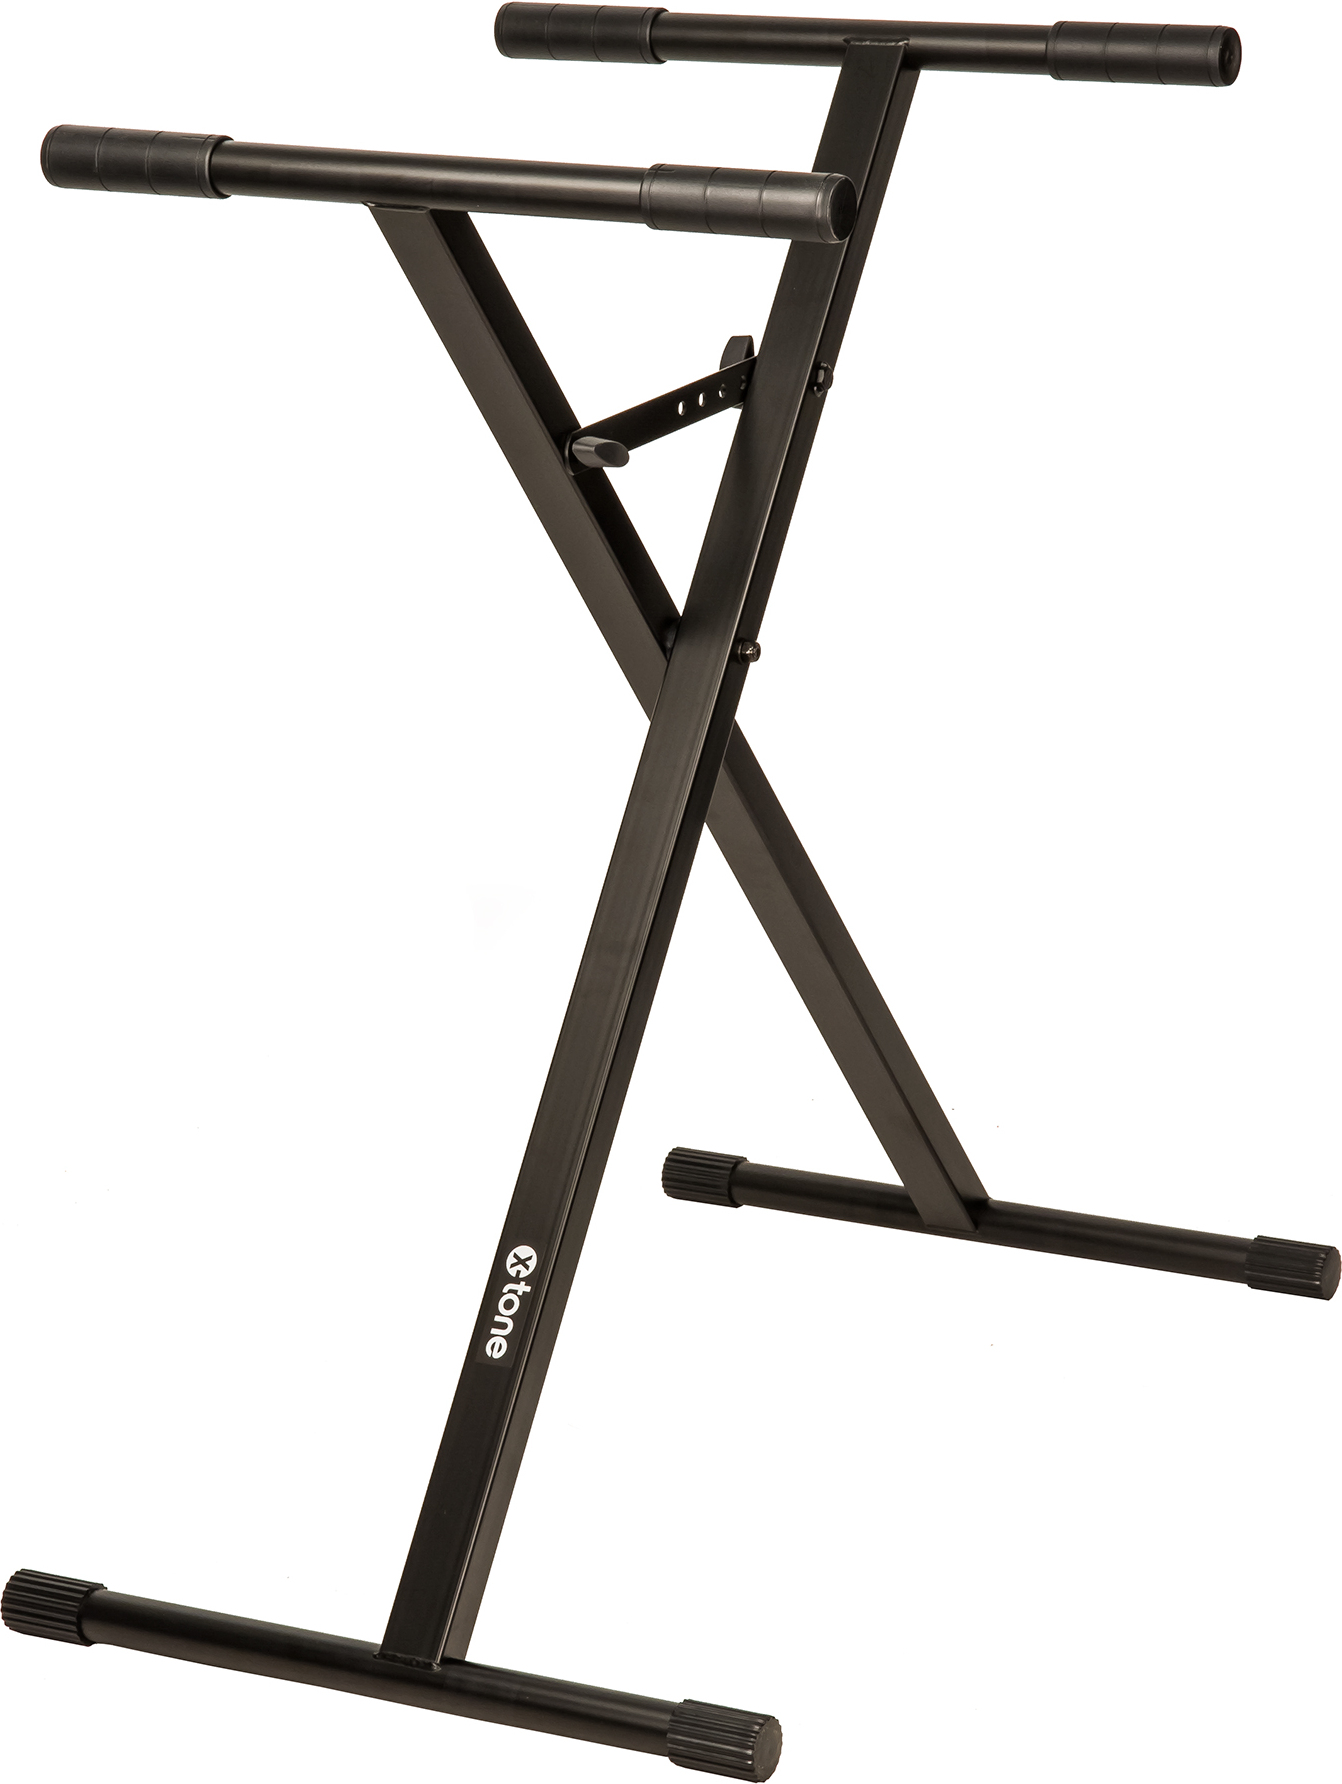 X-tone Xh6102 Stand Clavier Premium - Keyboard Stand - Main picture